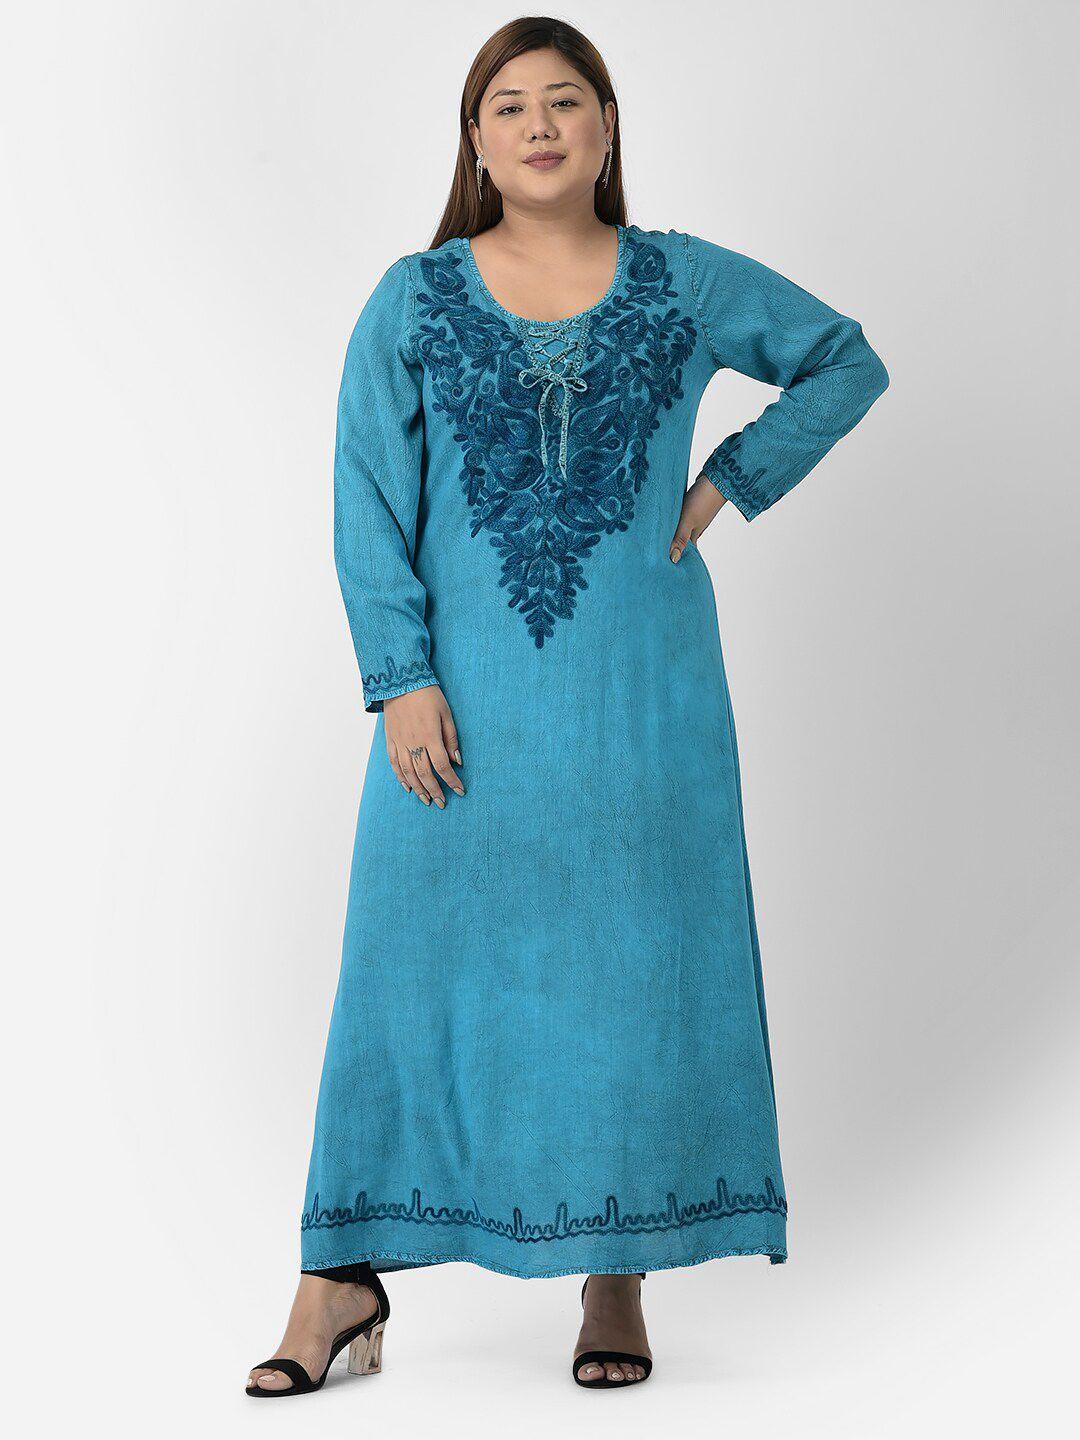 veldress women plus size teal blue & blue floral embroidered maxi dress